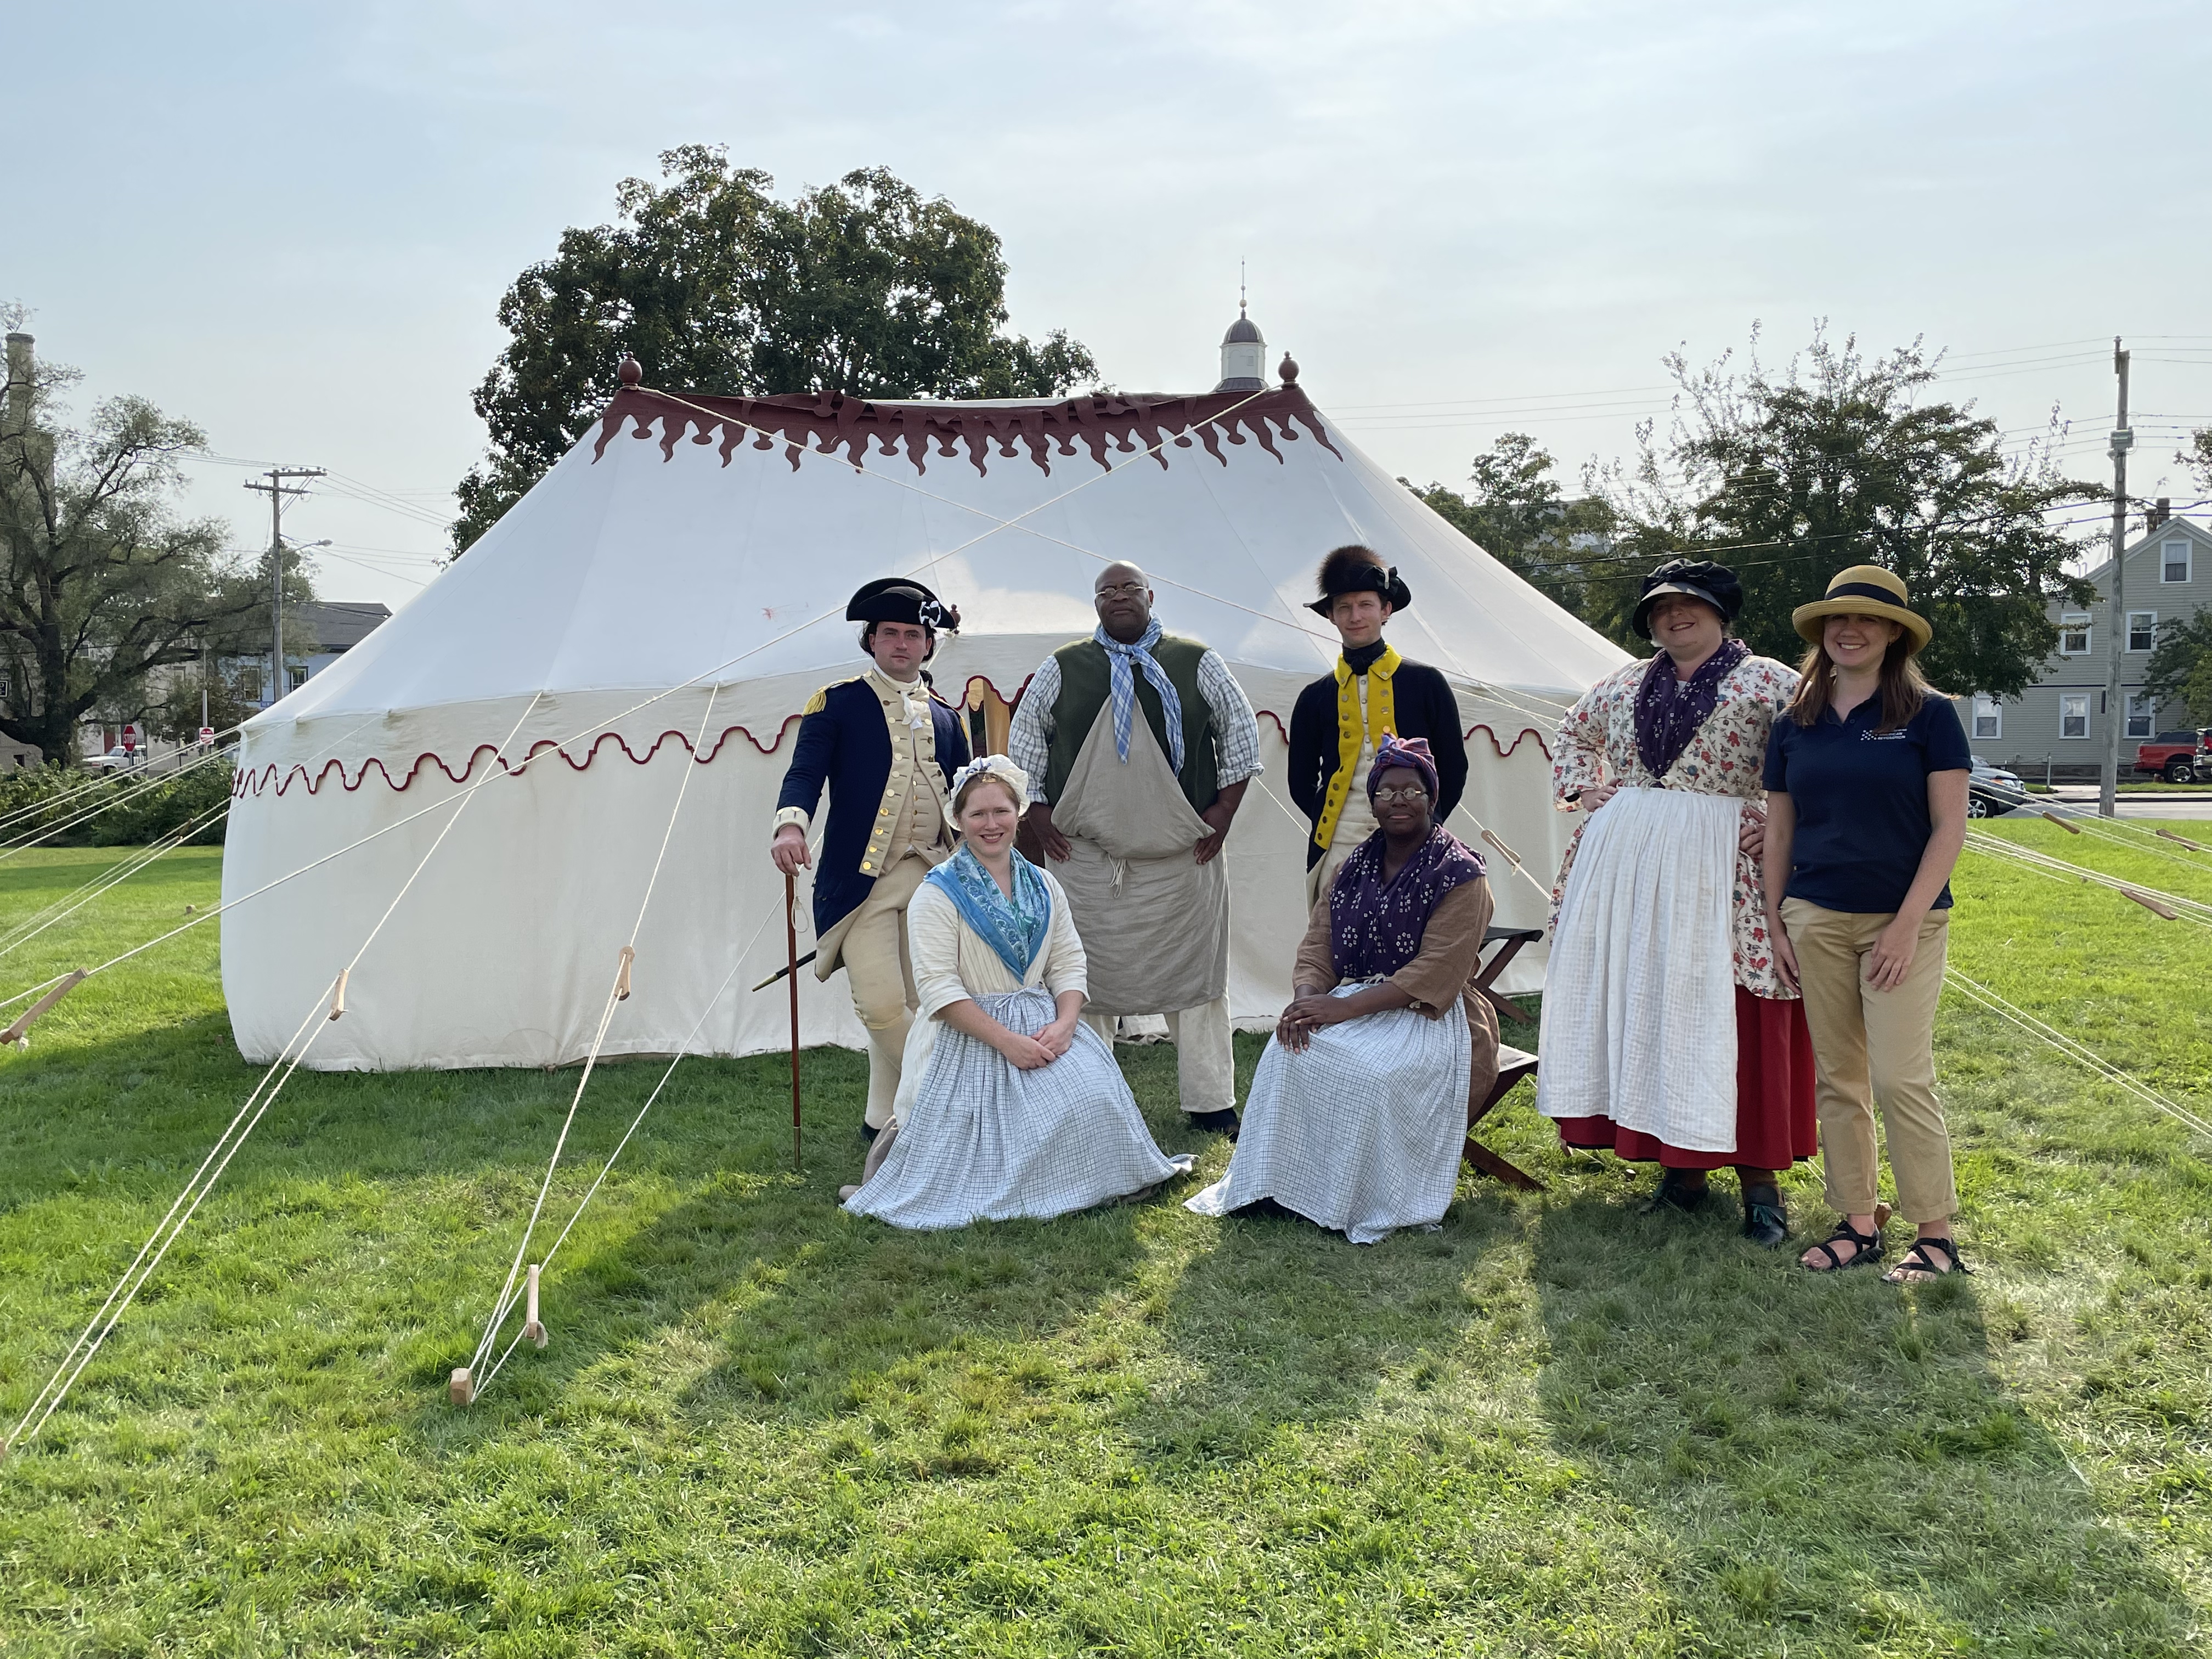 Seven reenactors in eighteenth century costumes standing in front of a replica of George Washington's  white oval tent with maroon trim on top.